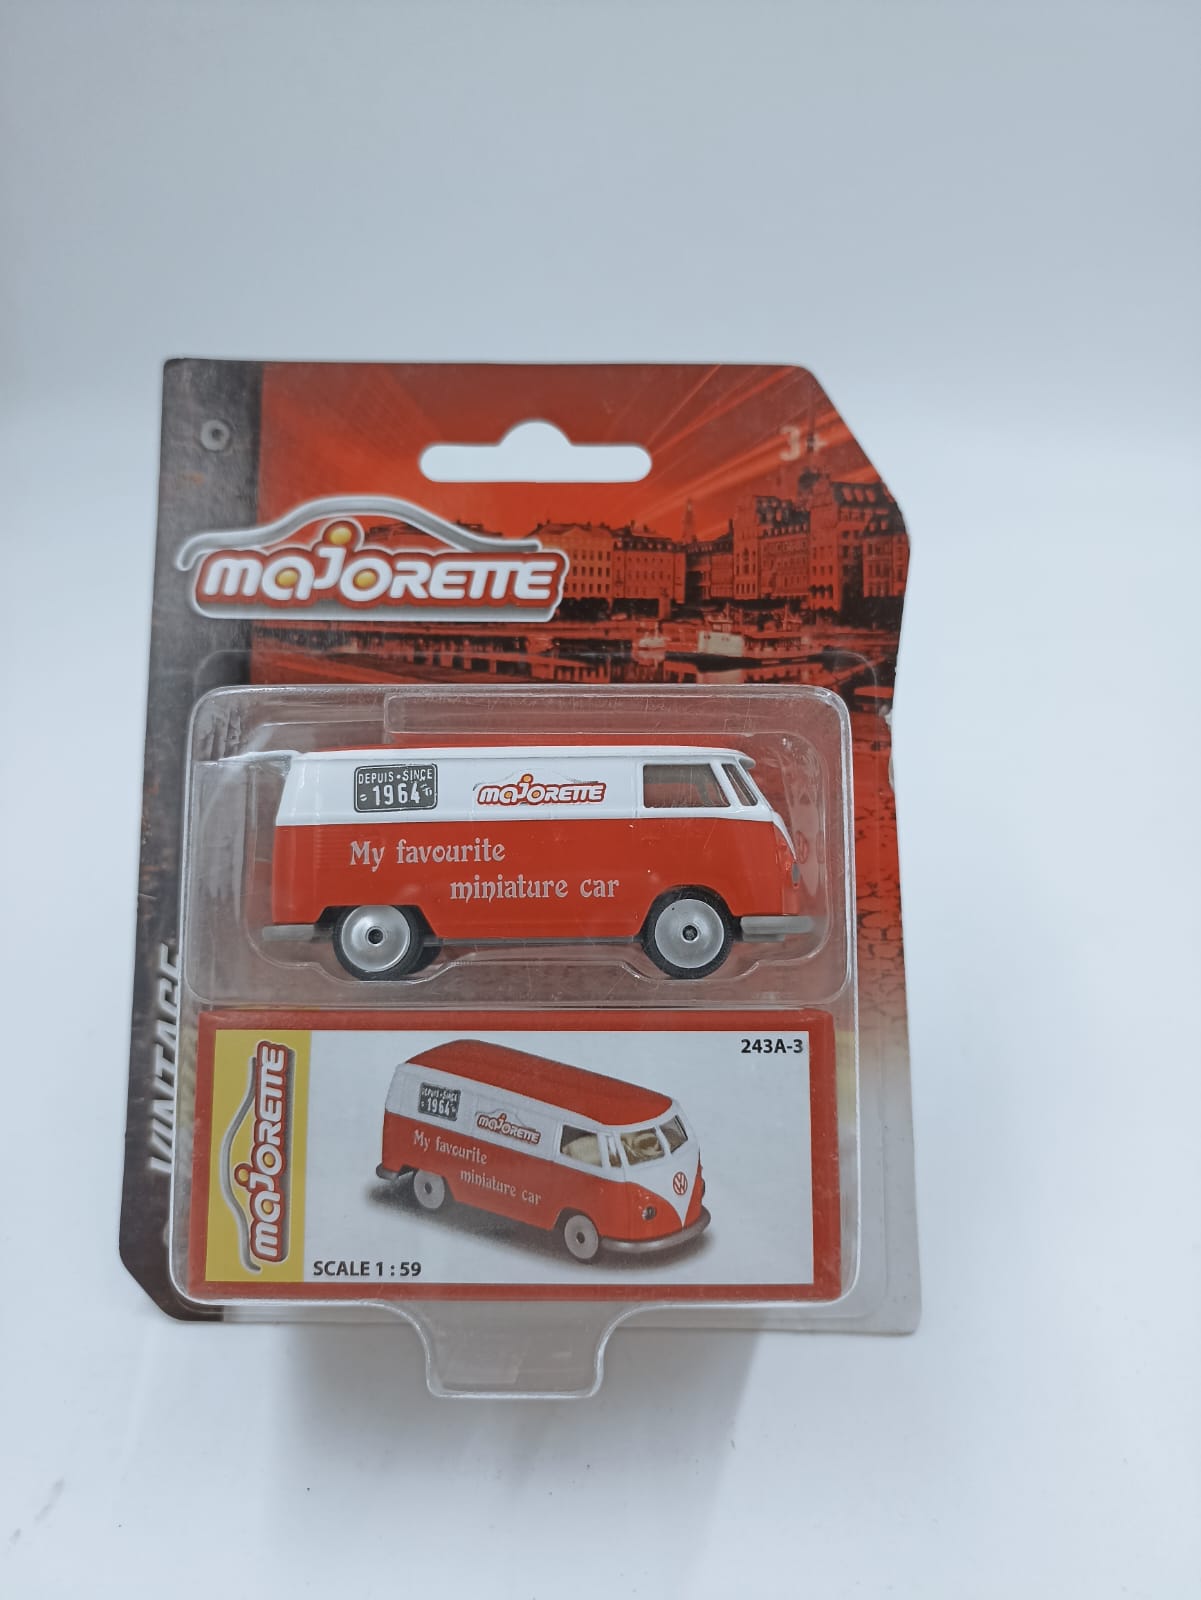 VW T1 – House Of Diecast